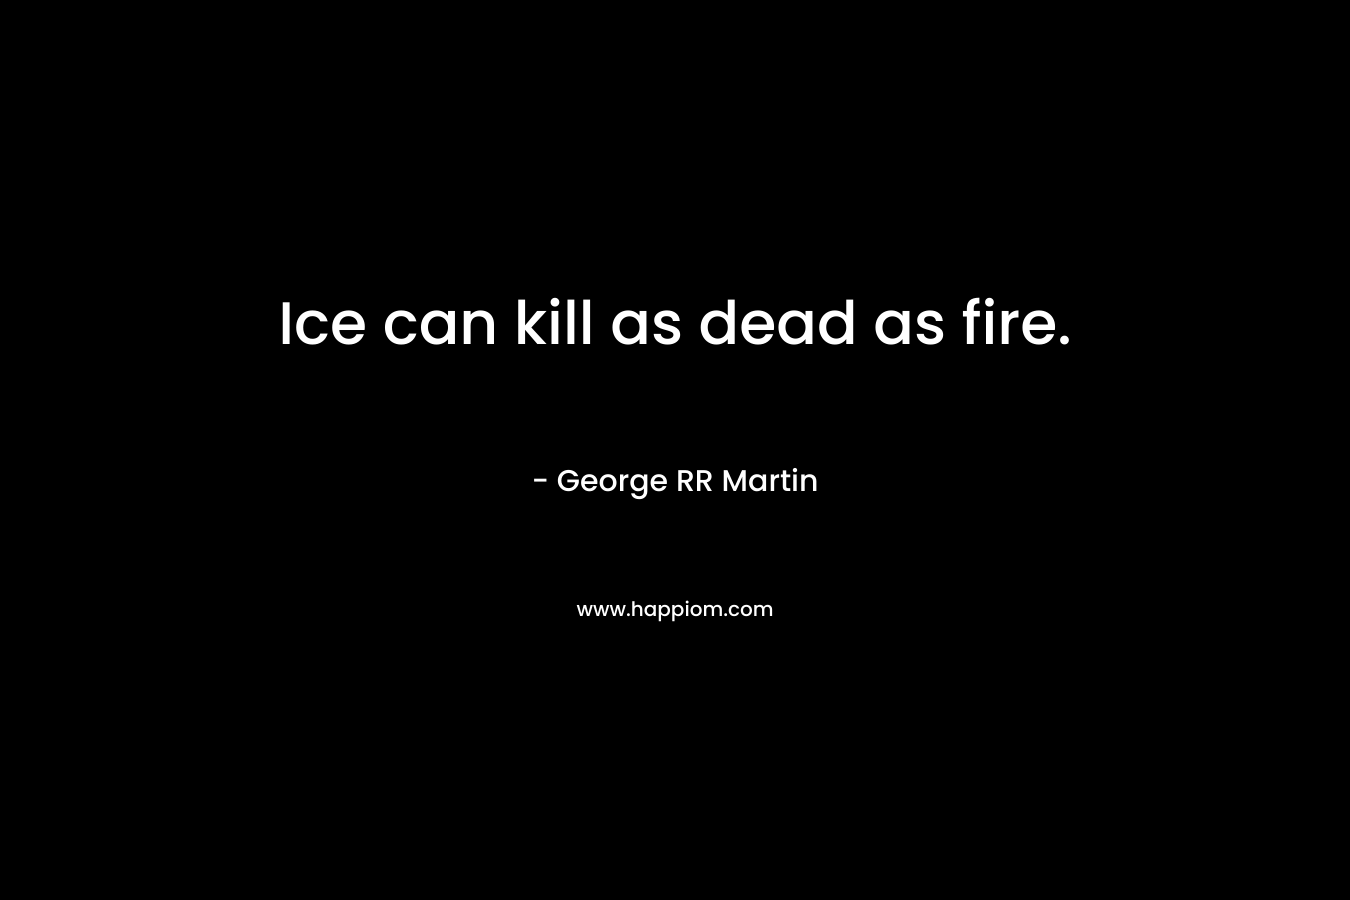 Ice can kill as dead as fire. – George RR Martin